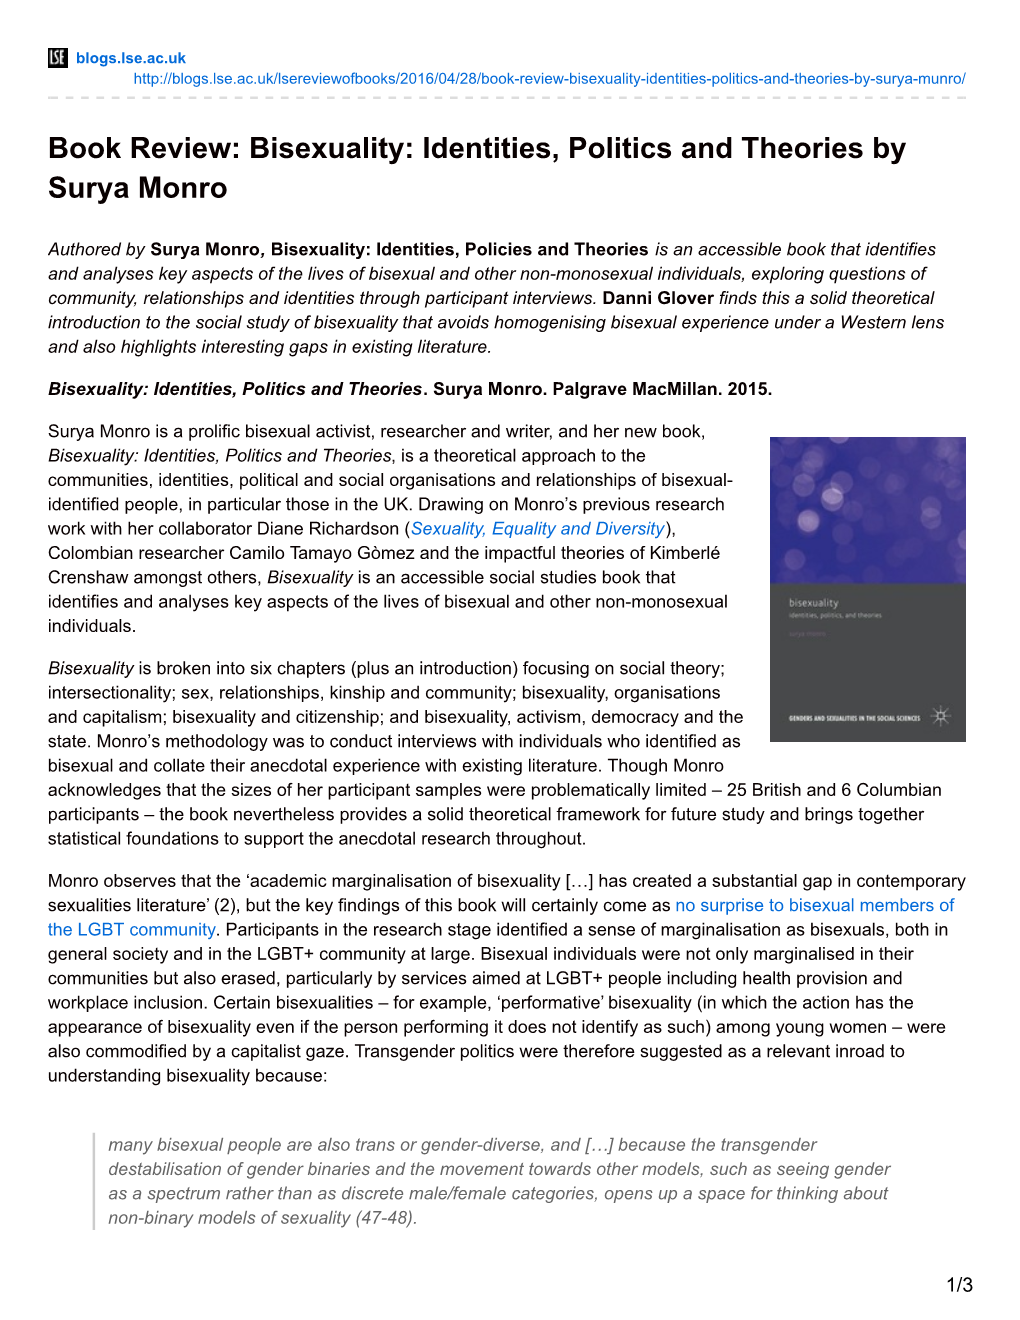 Book Review: Bisexuality: Identities, Politics and Theories by Surya Monro